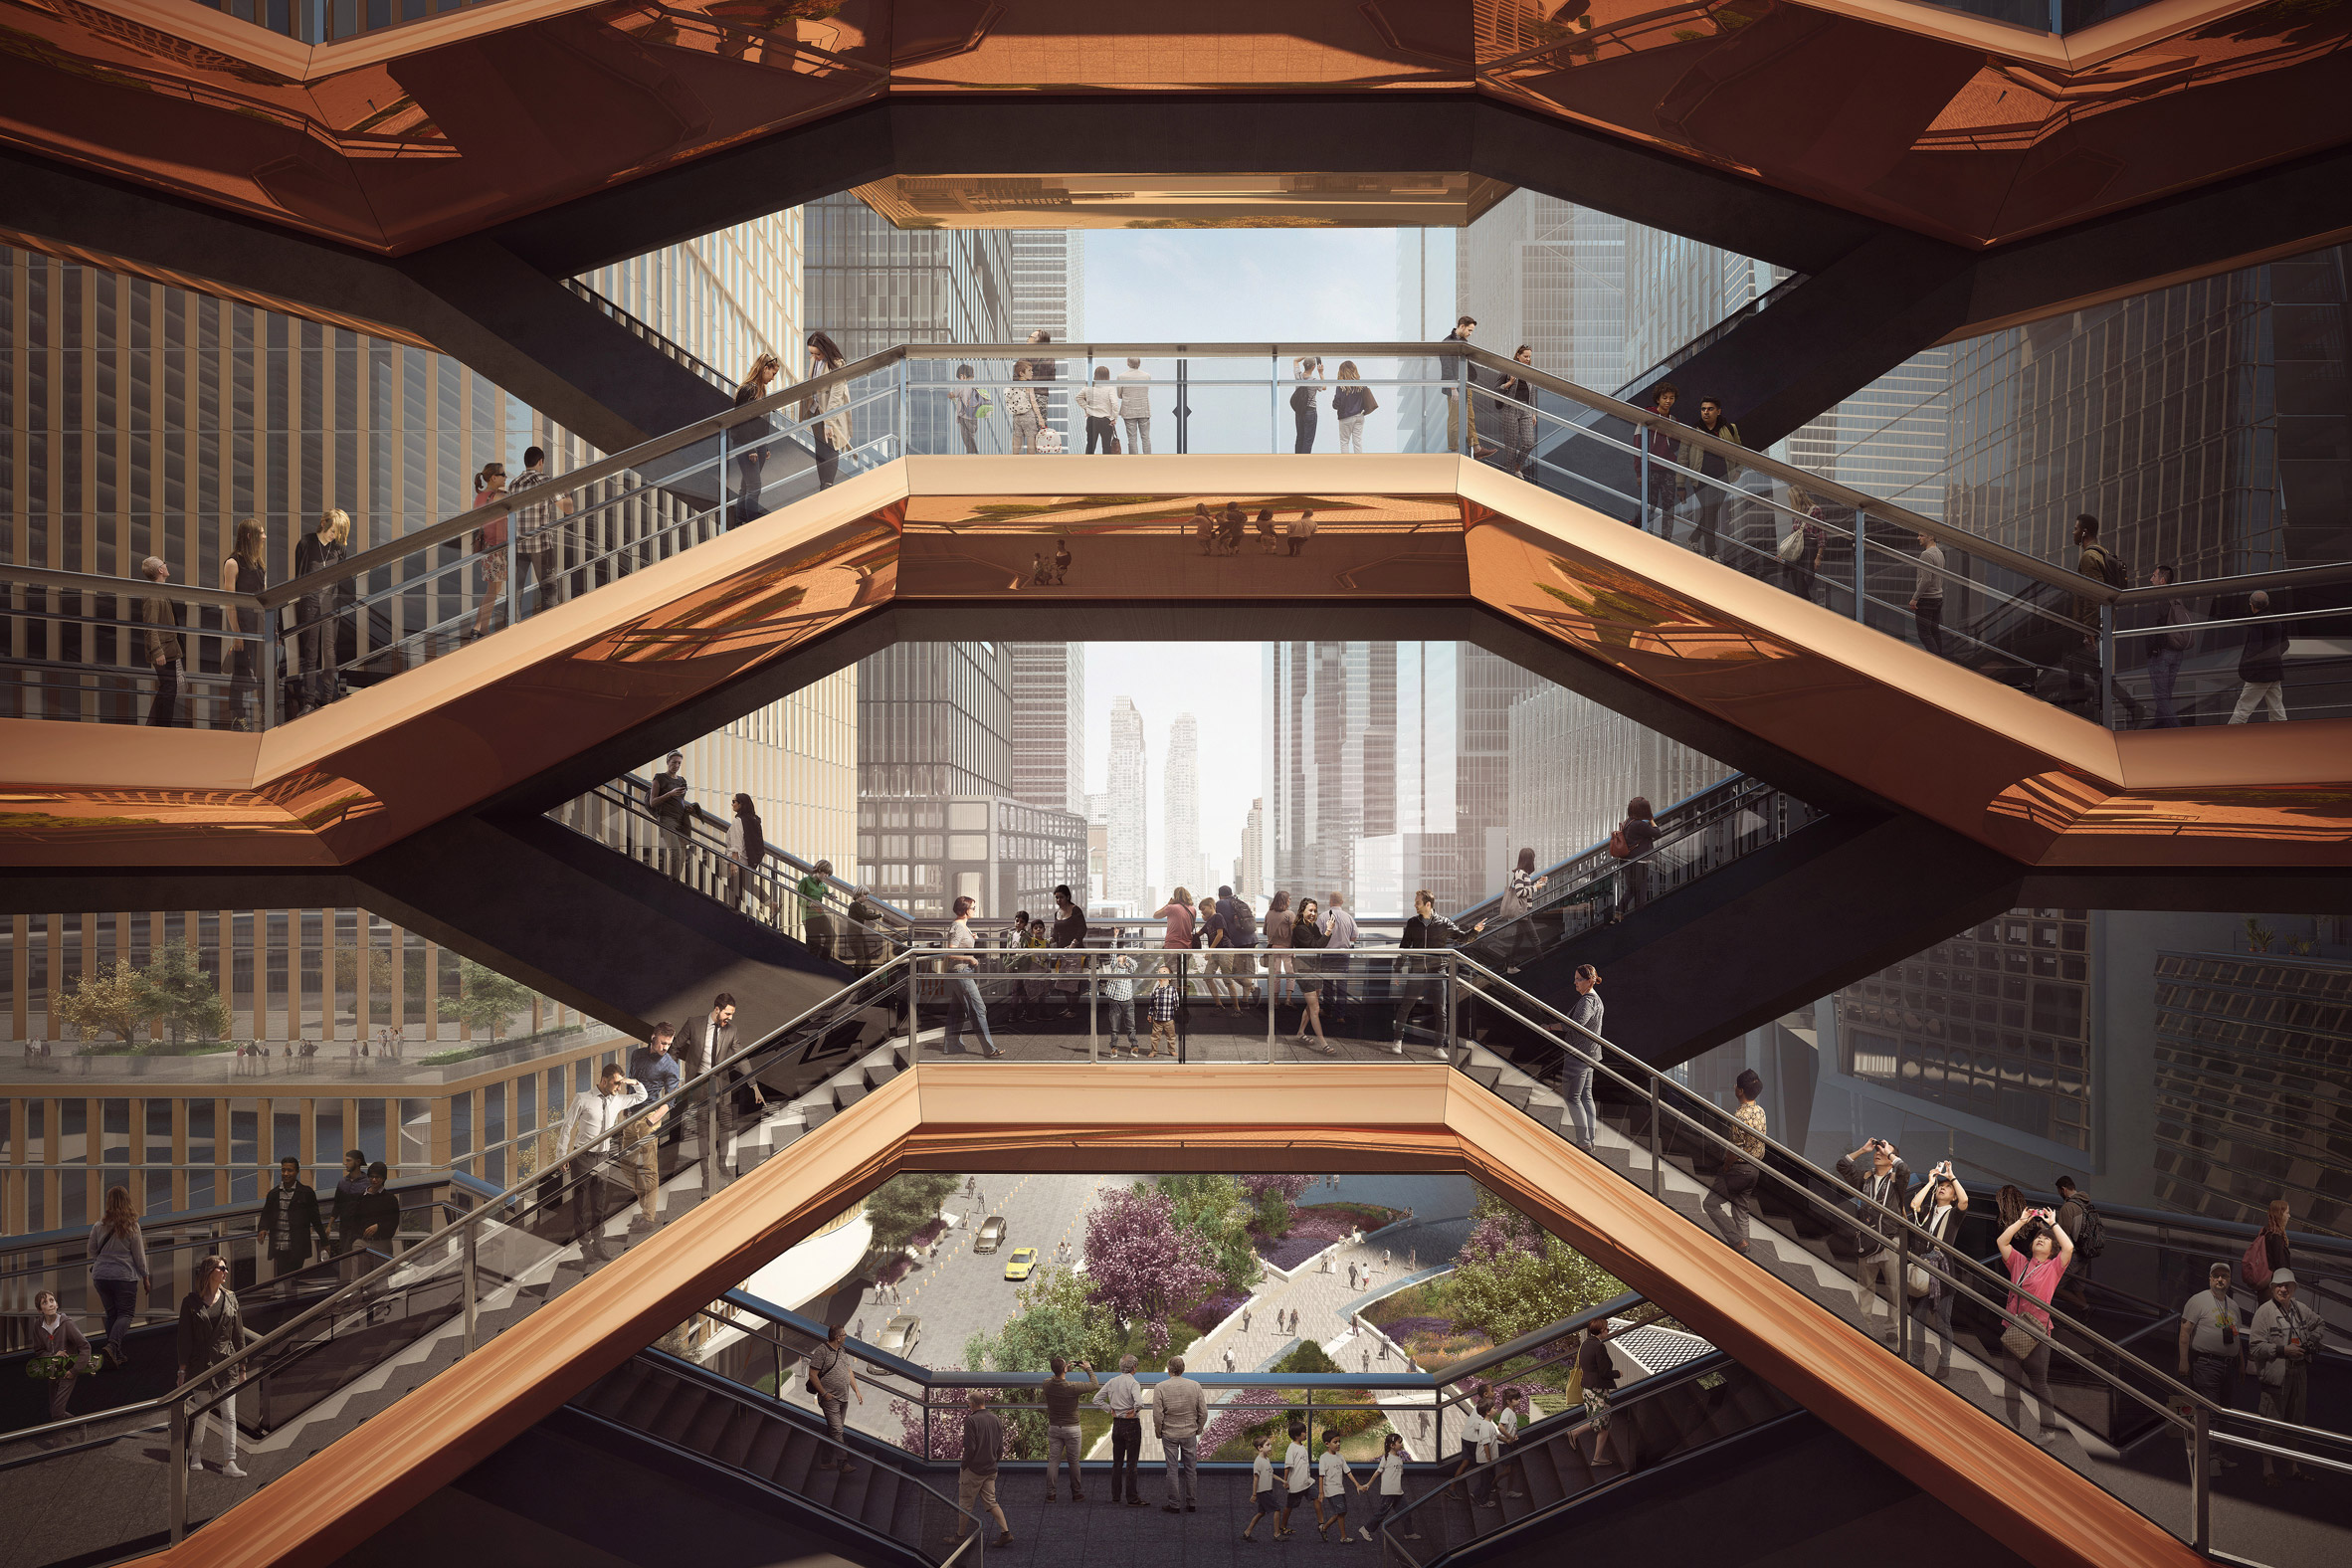 Heatherwick unveils staircase sculpture as "centrepiece" for New York’s Hudson Yards